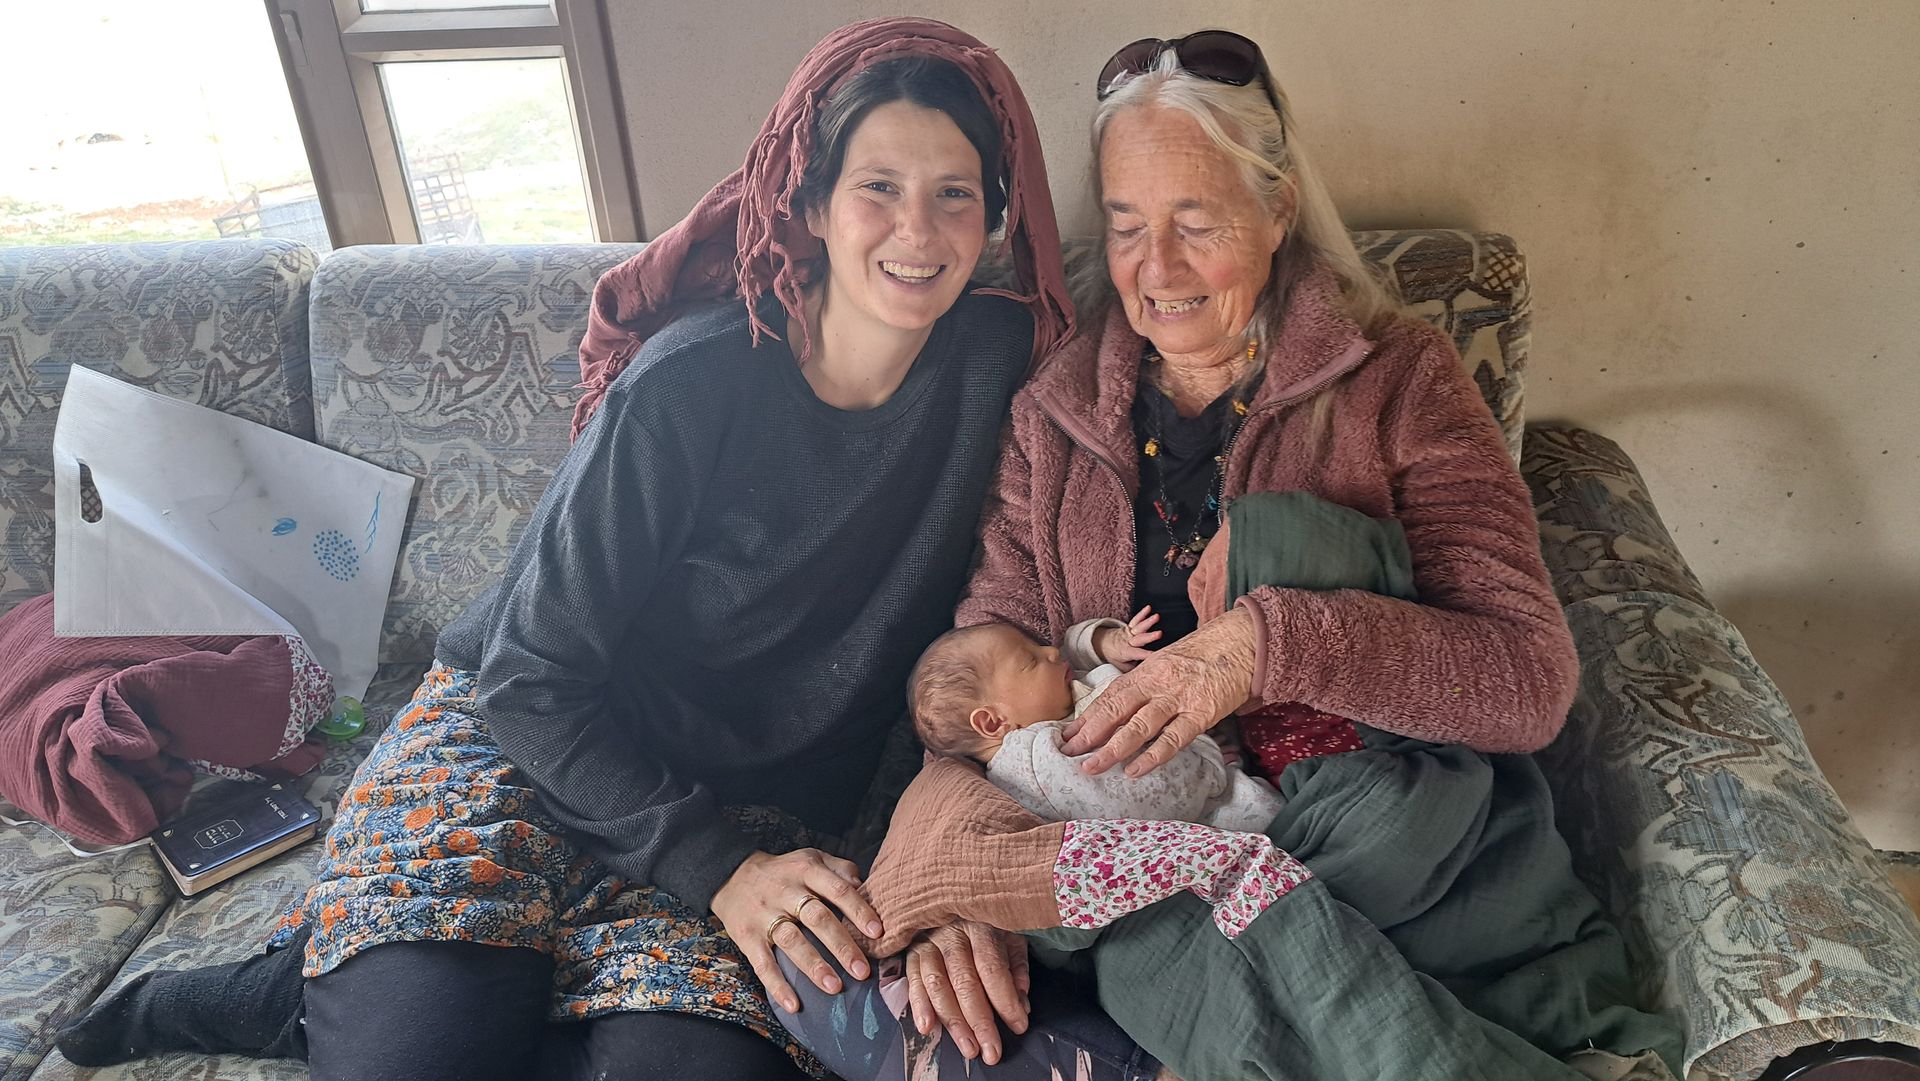 multi-generation family  
grandmother with granddaughter holding great-granddaughter